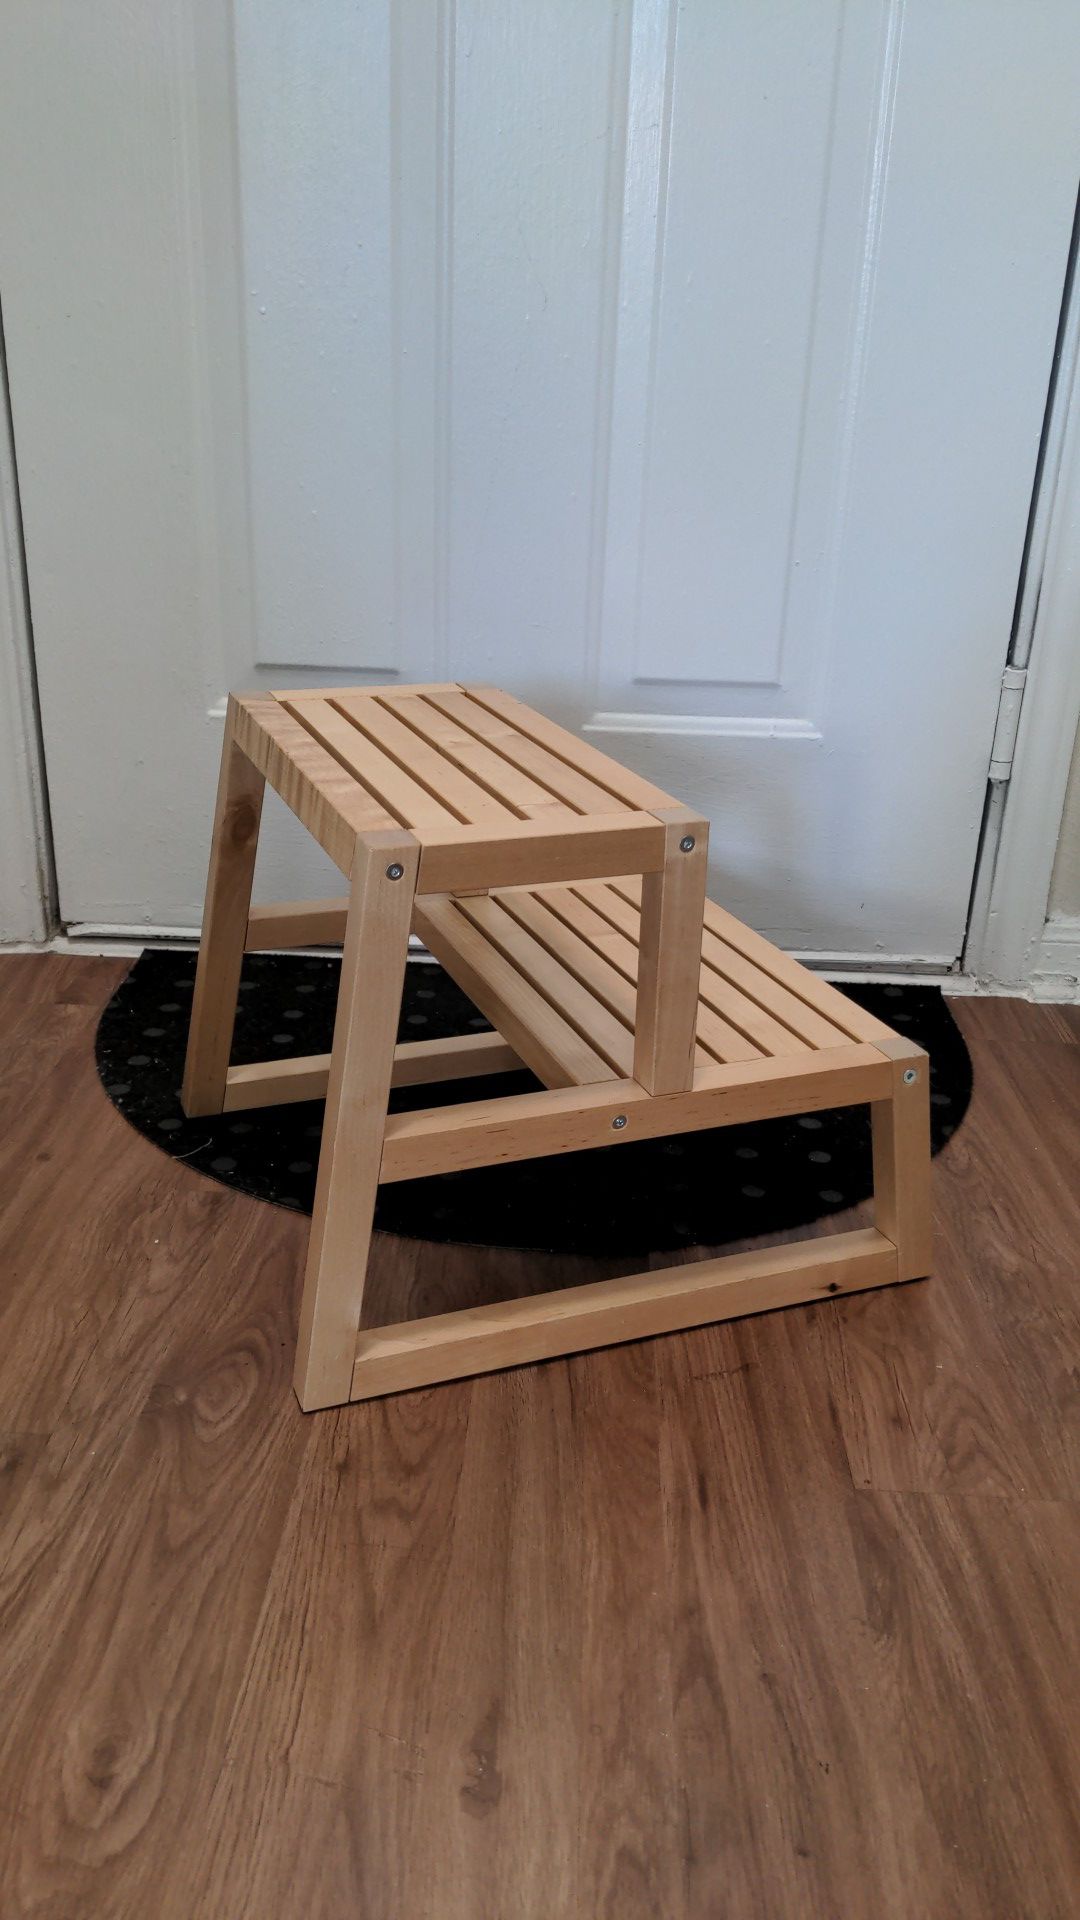 Small 2-step wooden stool